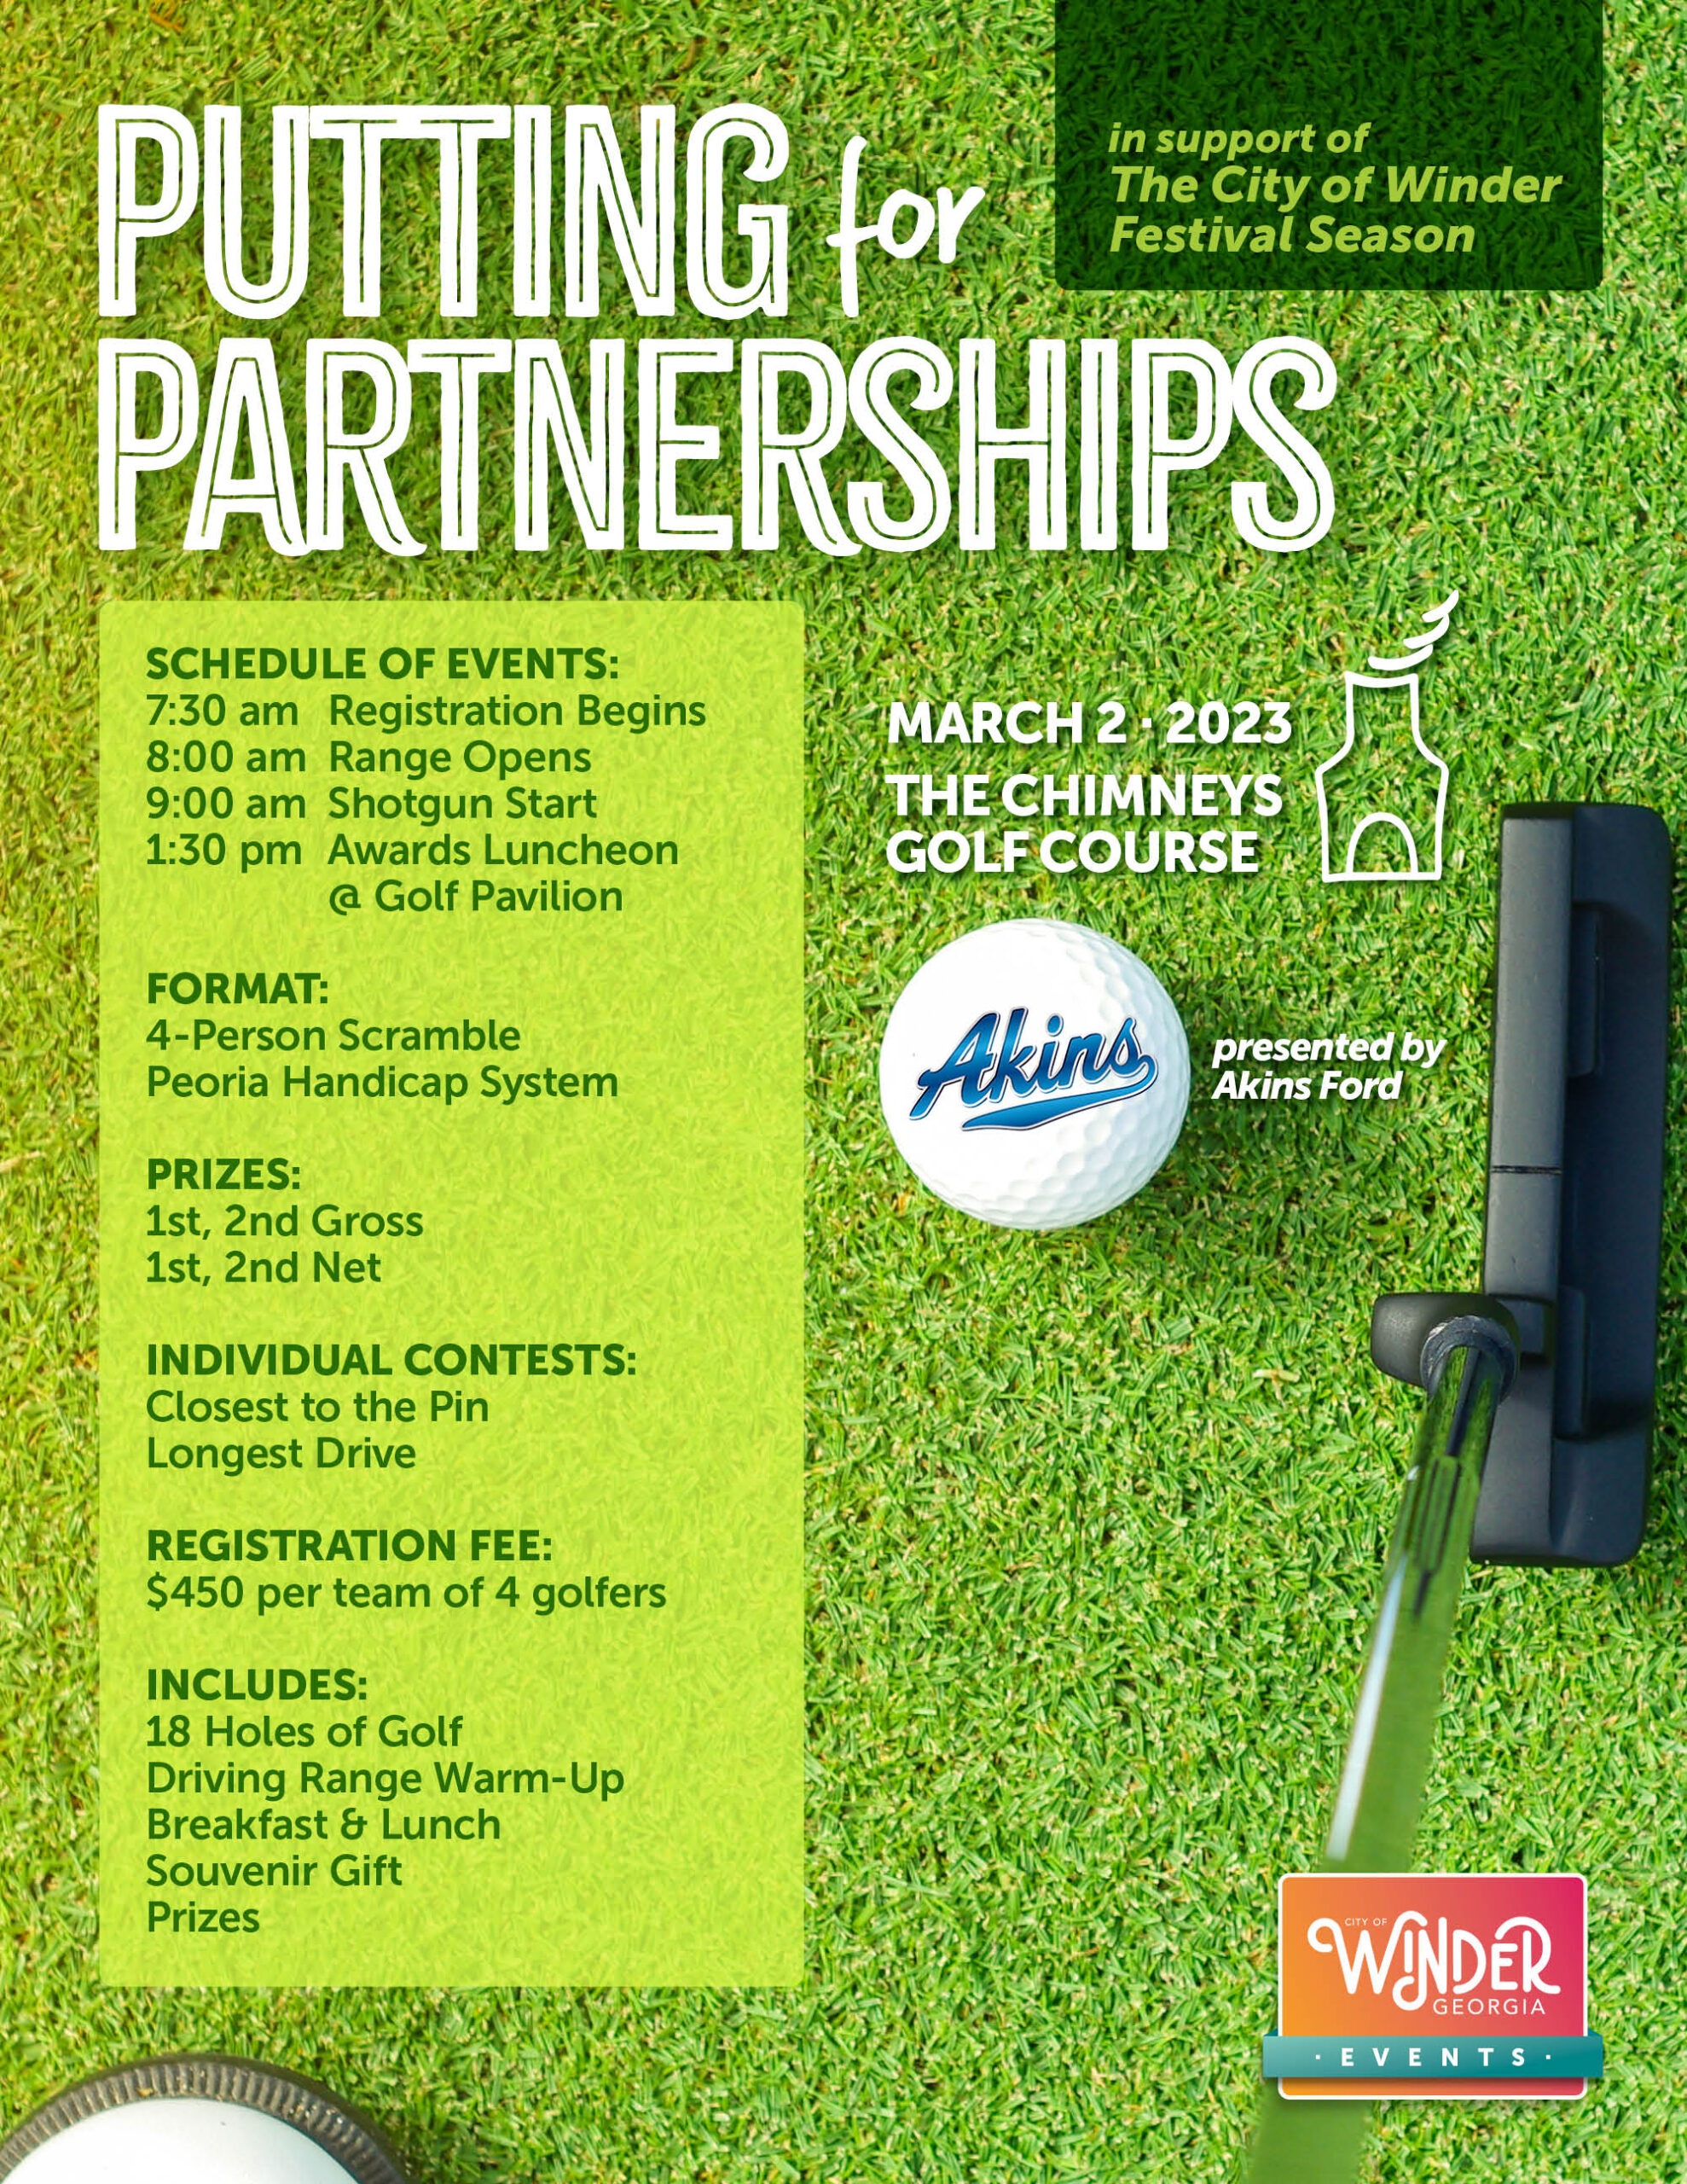 Event flyer for the City of Winder's Putting for Partnerships golf tournament at The Chimneys.